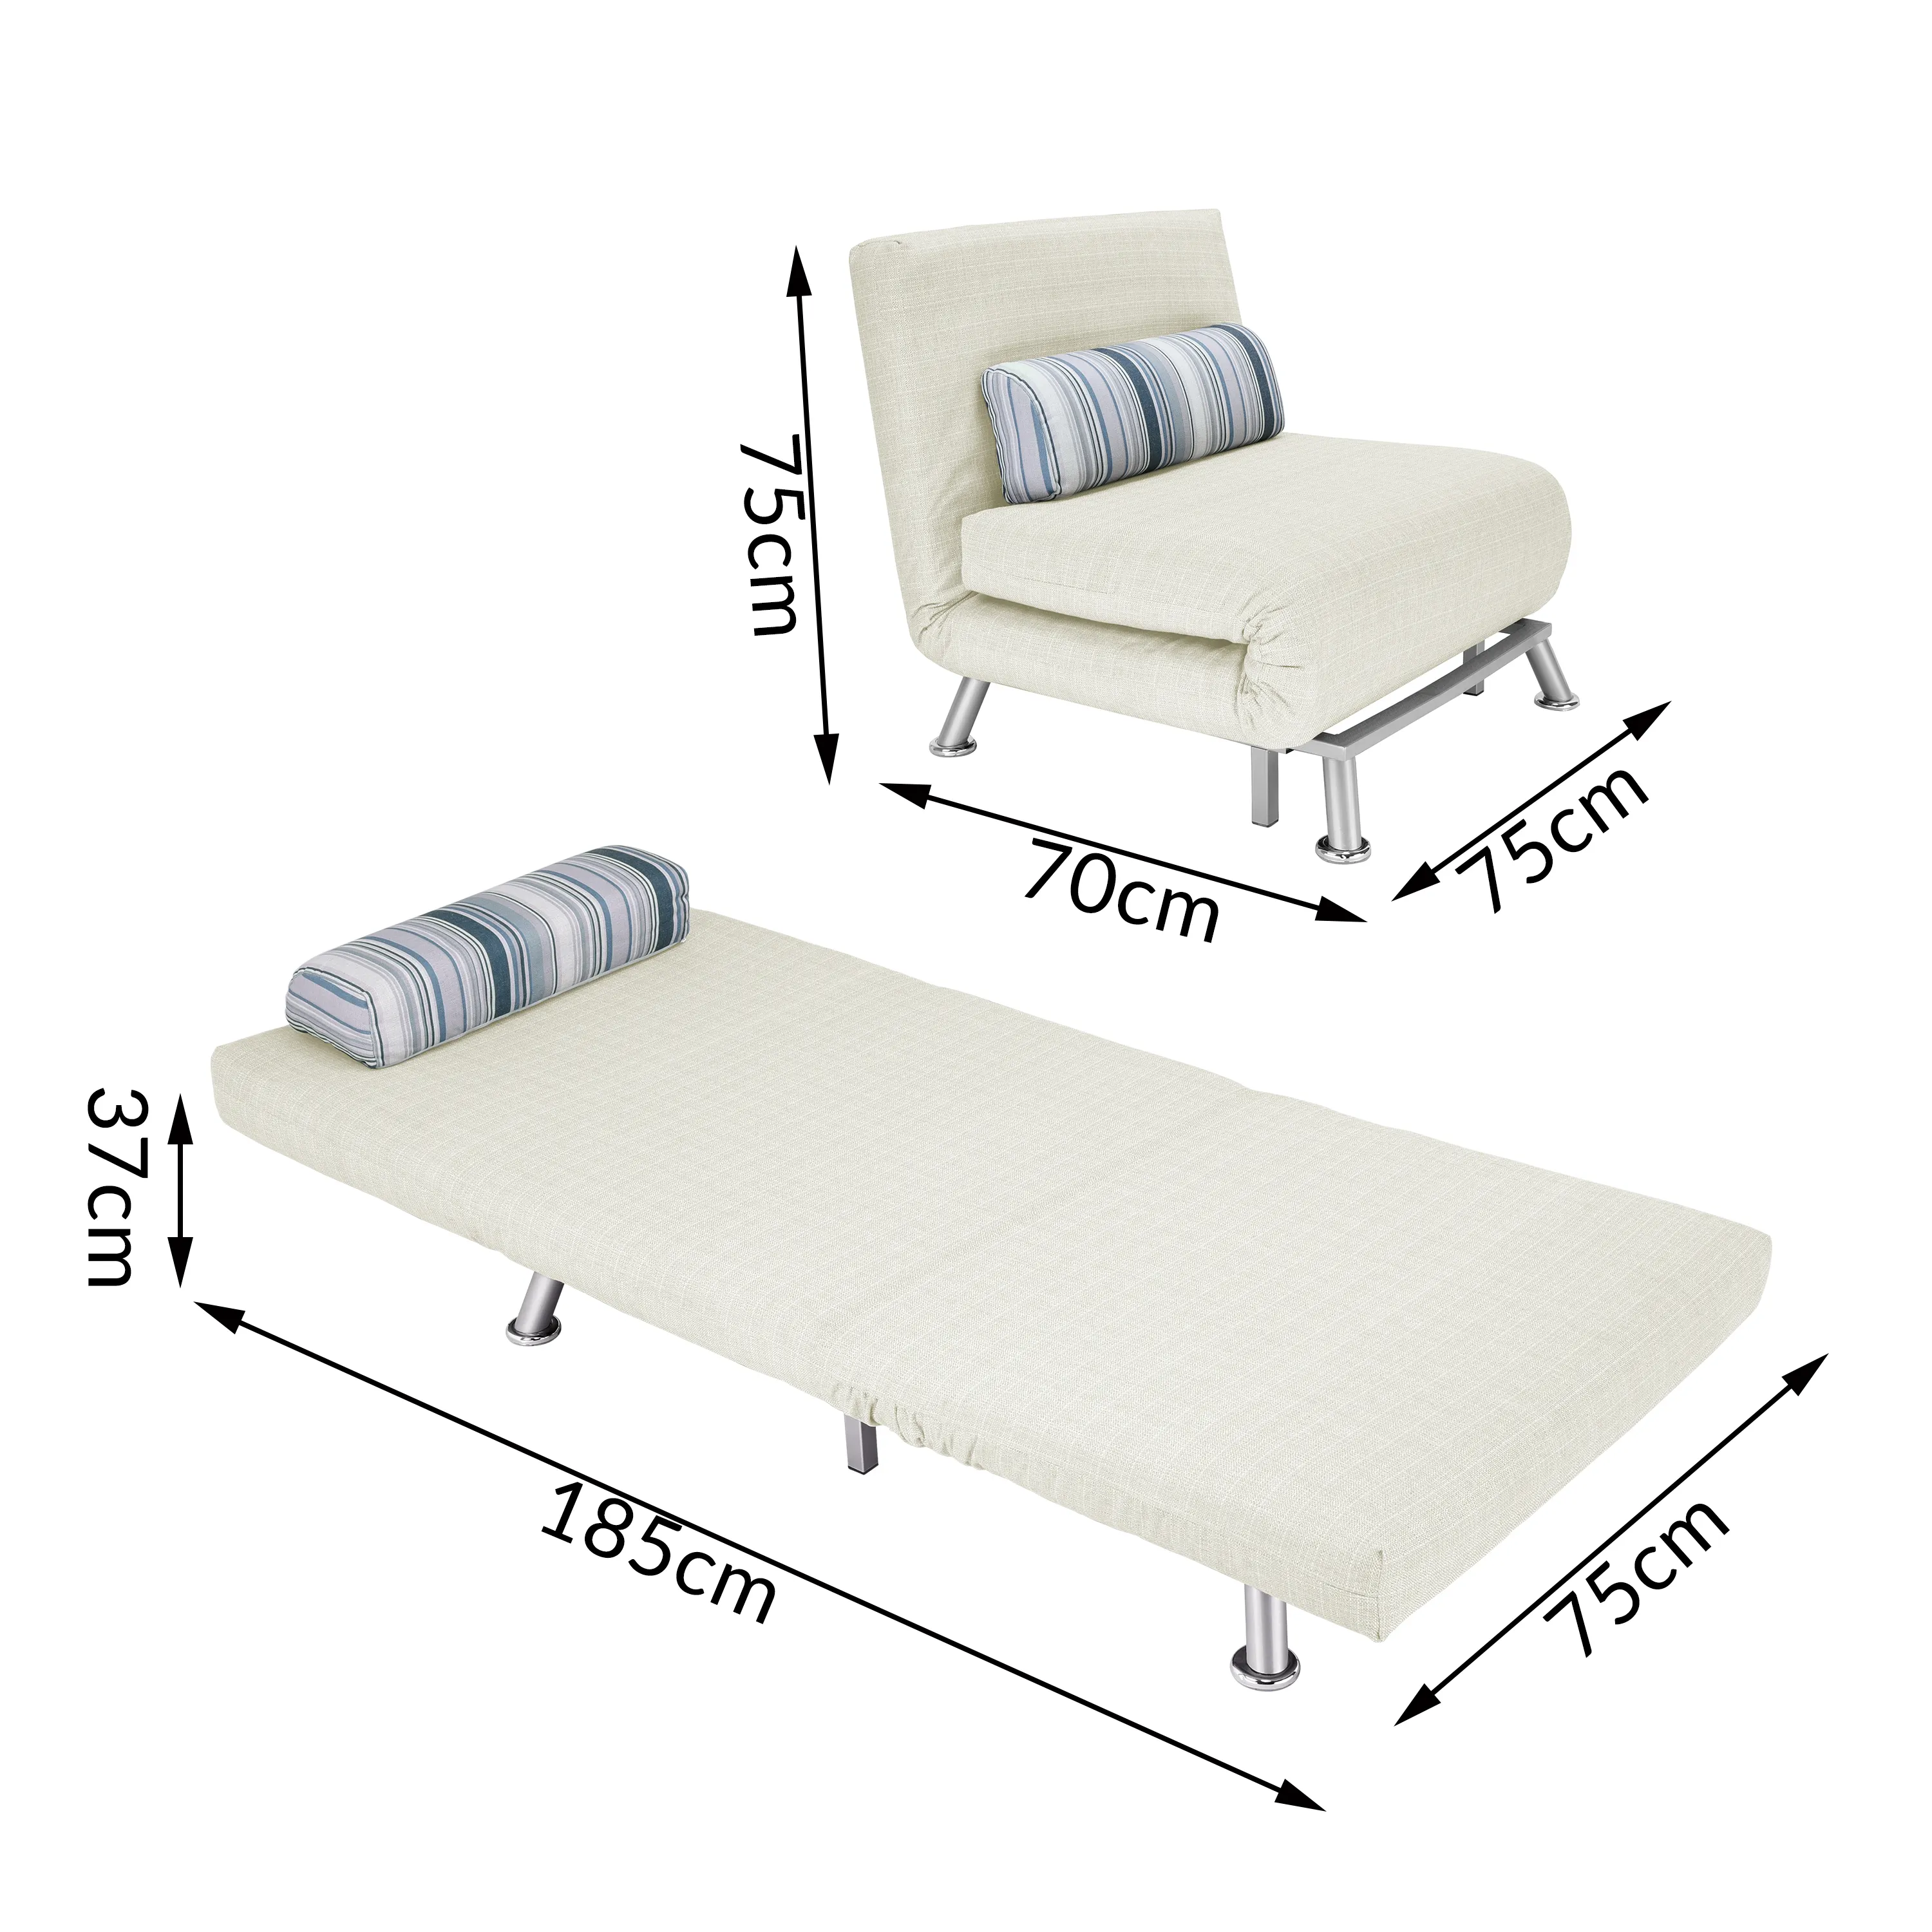 Folding Sofa Bed Metal Structure Upholstered Fabric Armchair Folding single Bed grey cream for livingroom / bedroom